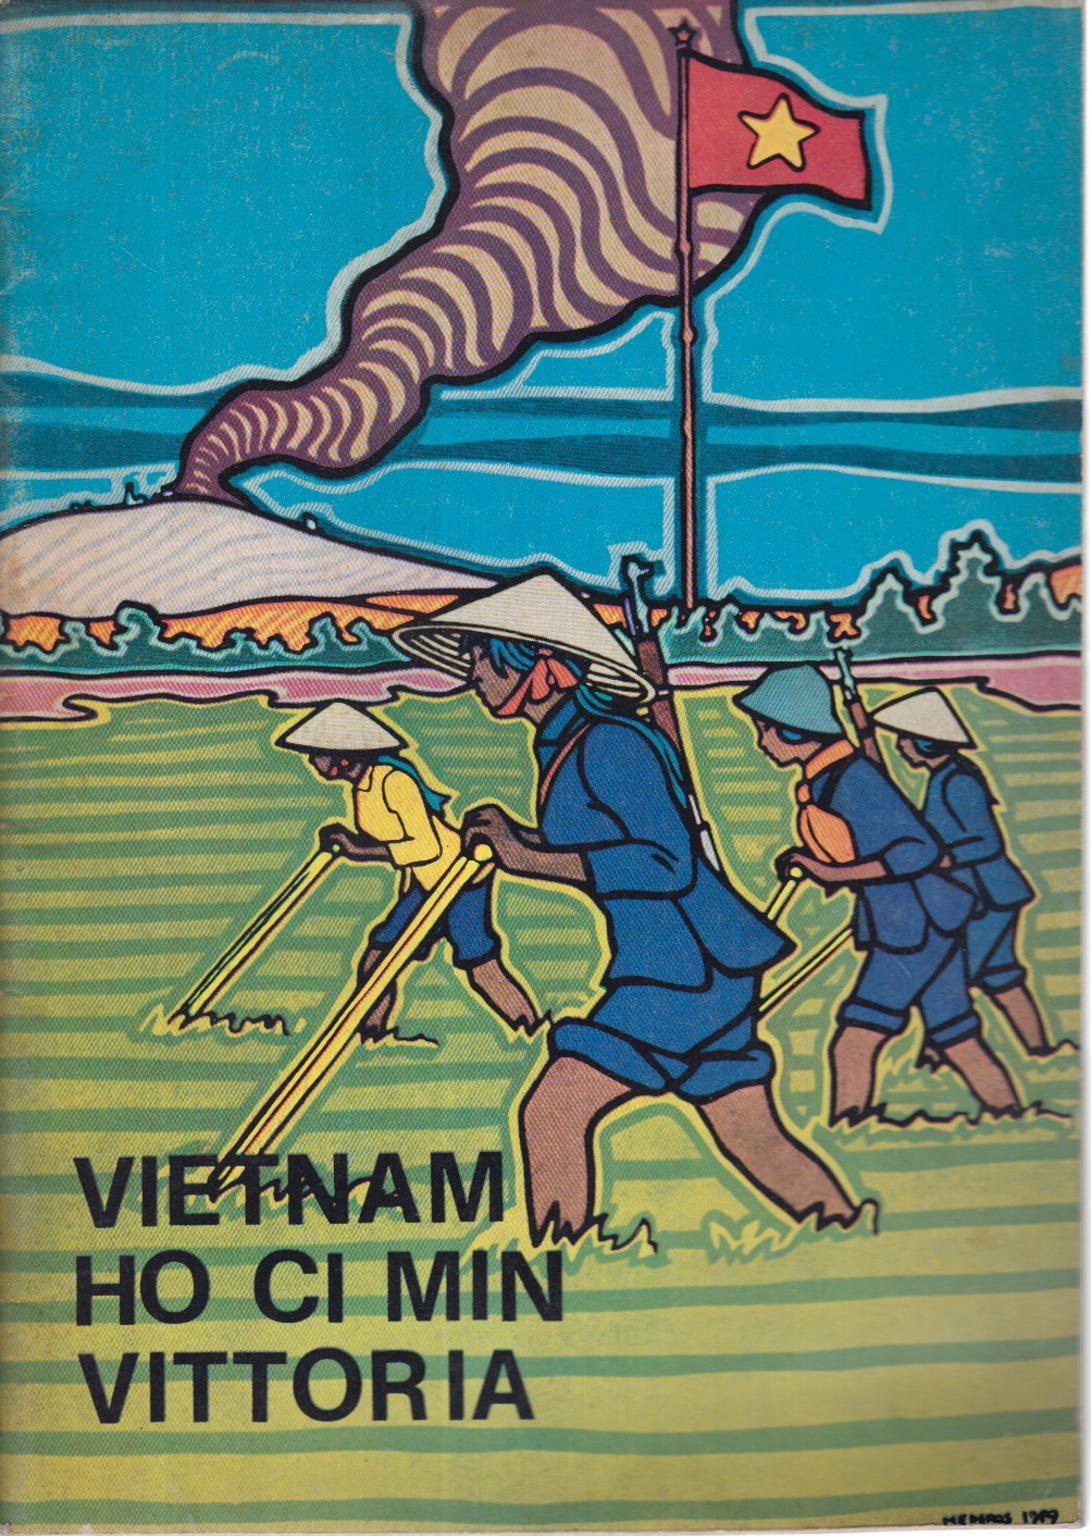 Vietnam, I There Min victory, s.a.